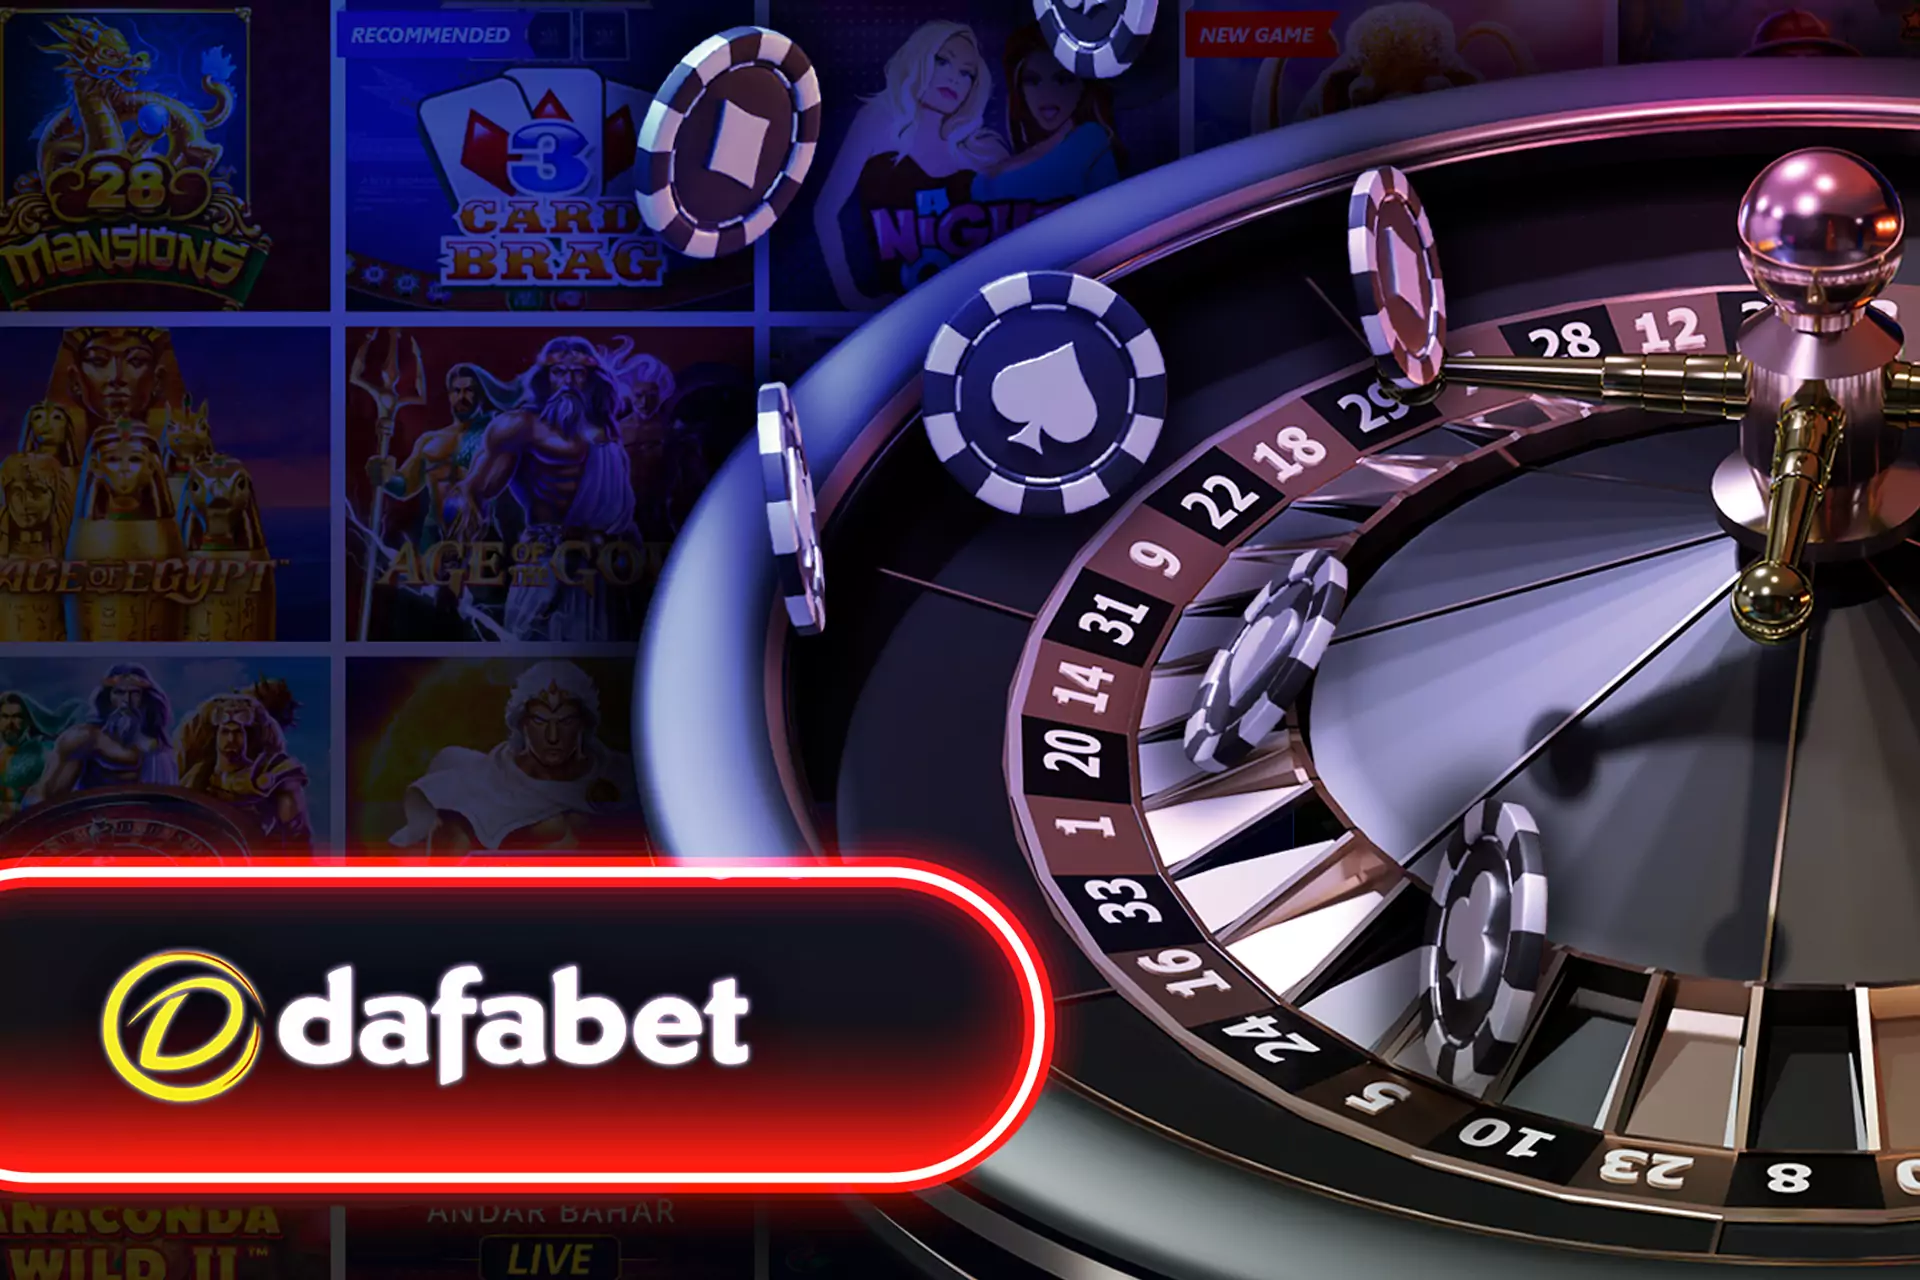 To get the welcome bonus from Dafabet, you have to make the first deposit.